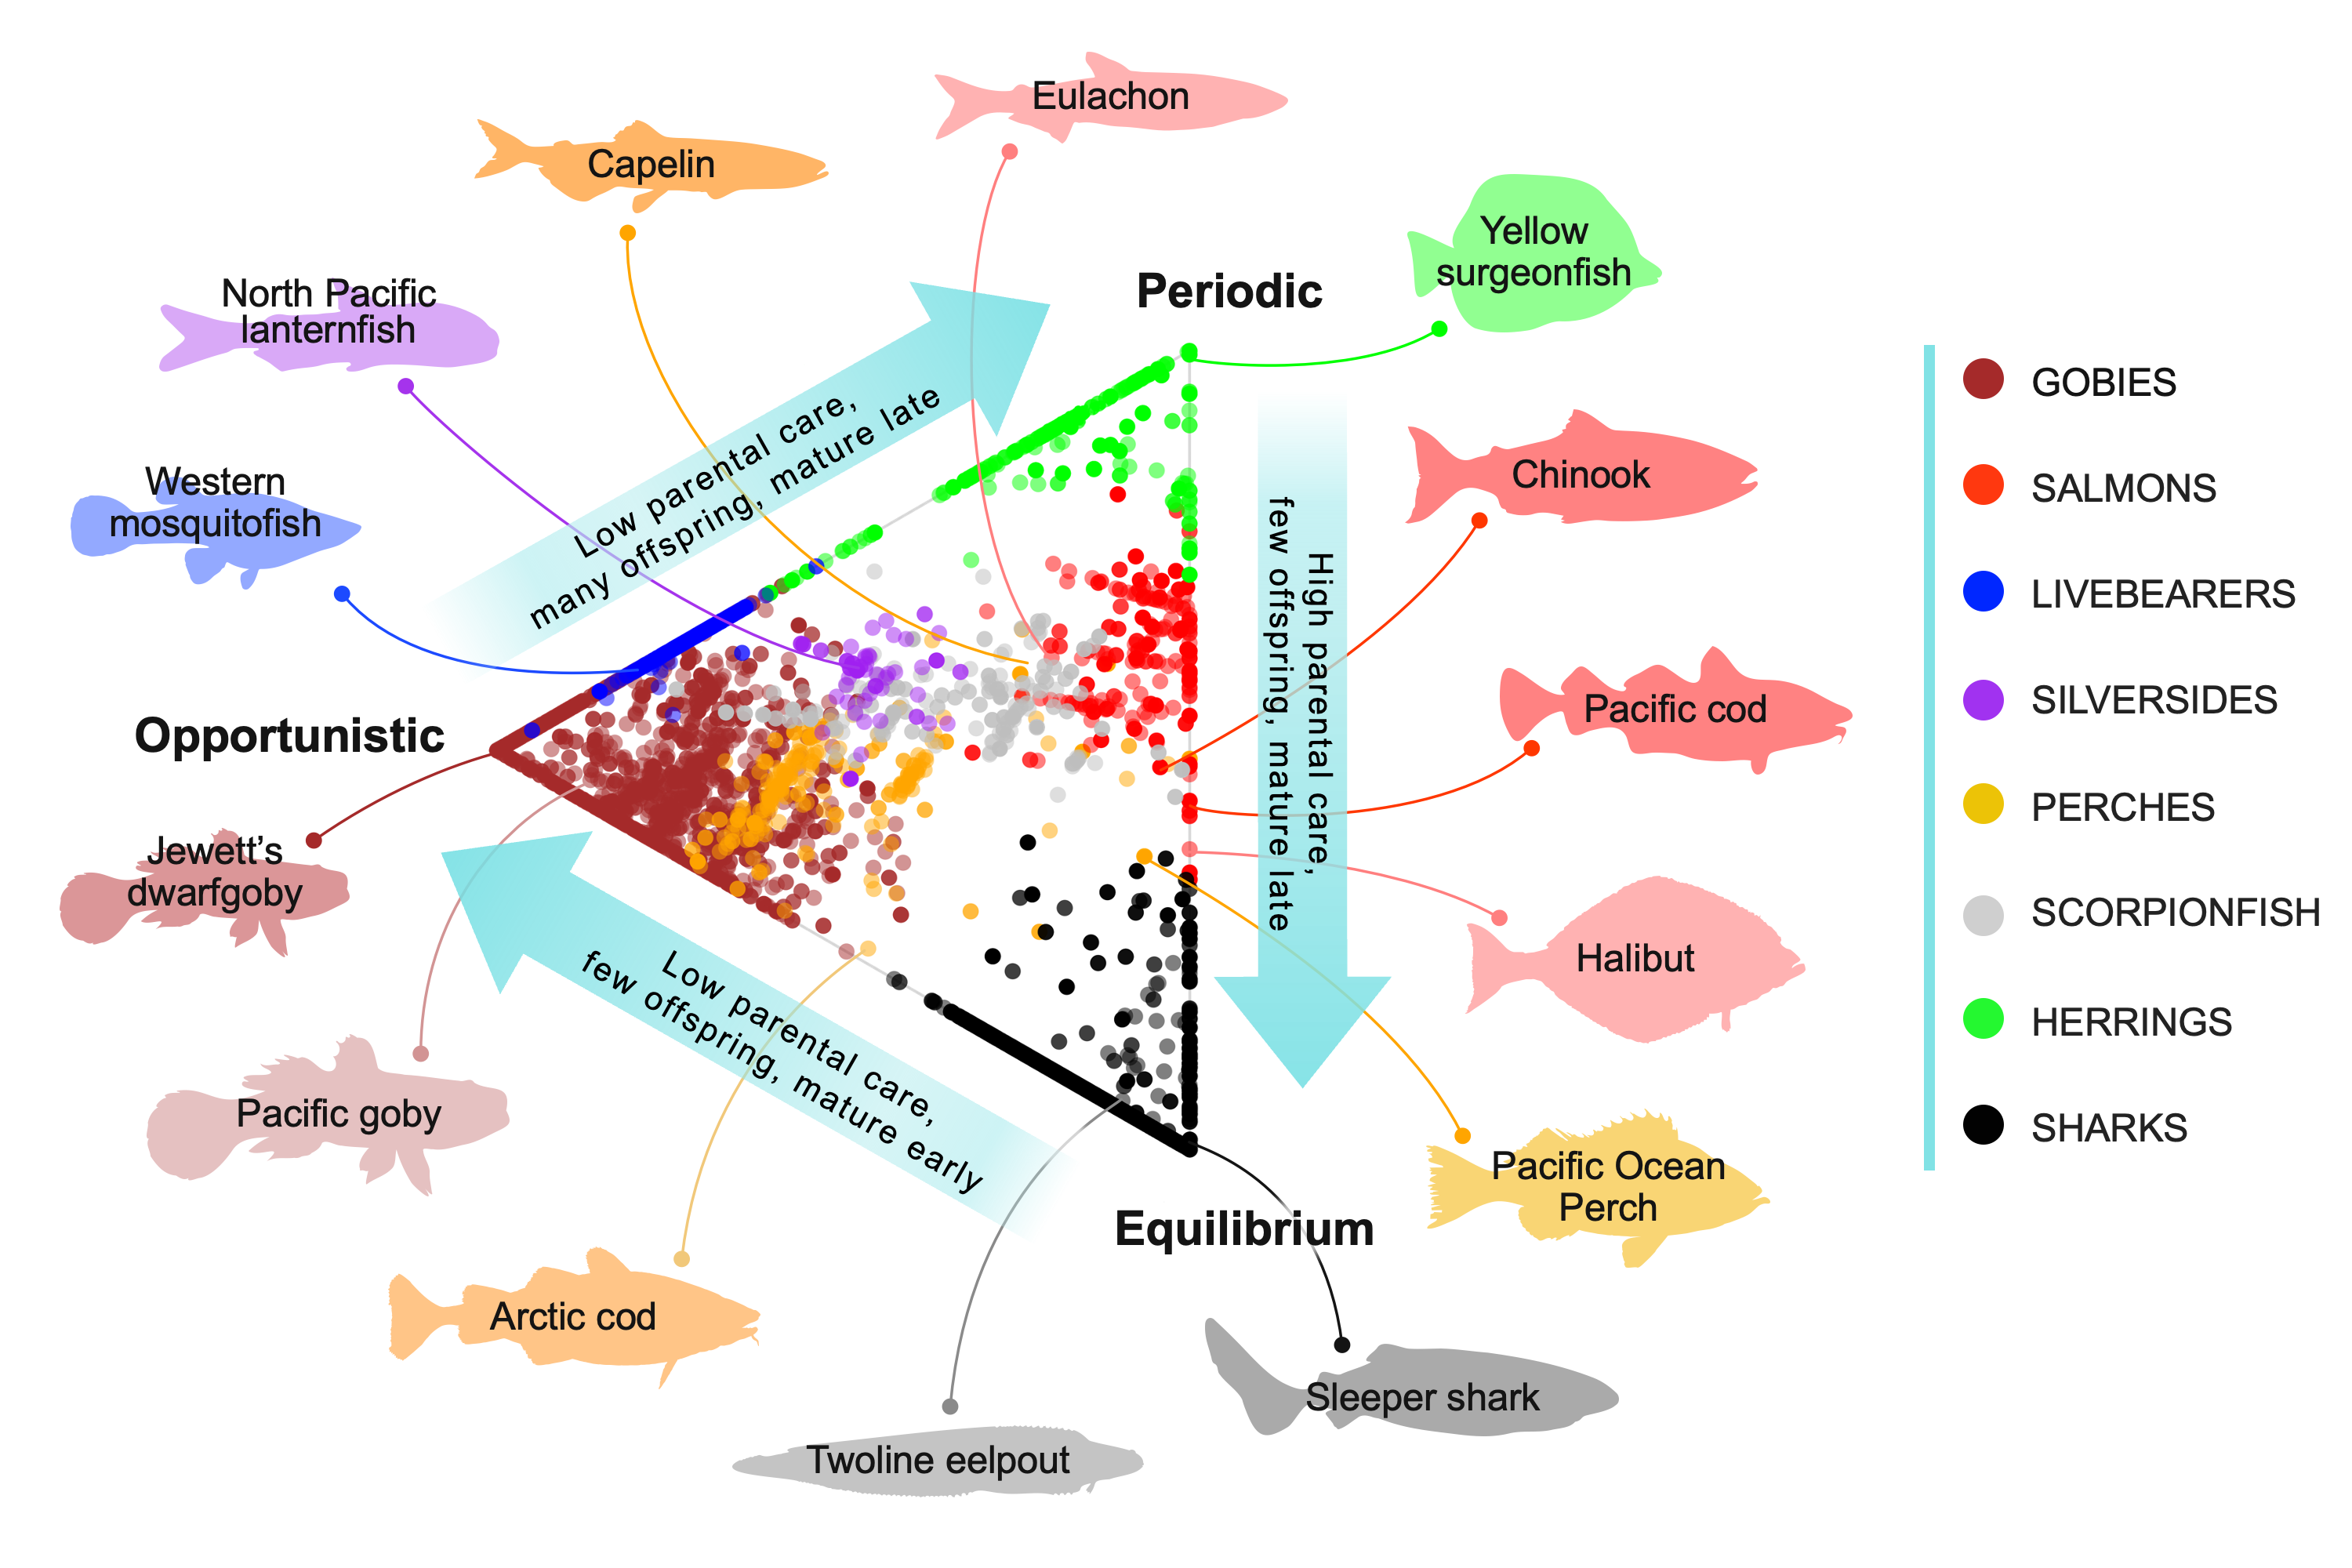 Image: For the First Time, Scientists Can Predict Traits for All Fish Worldwide